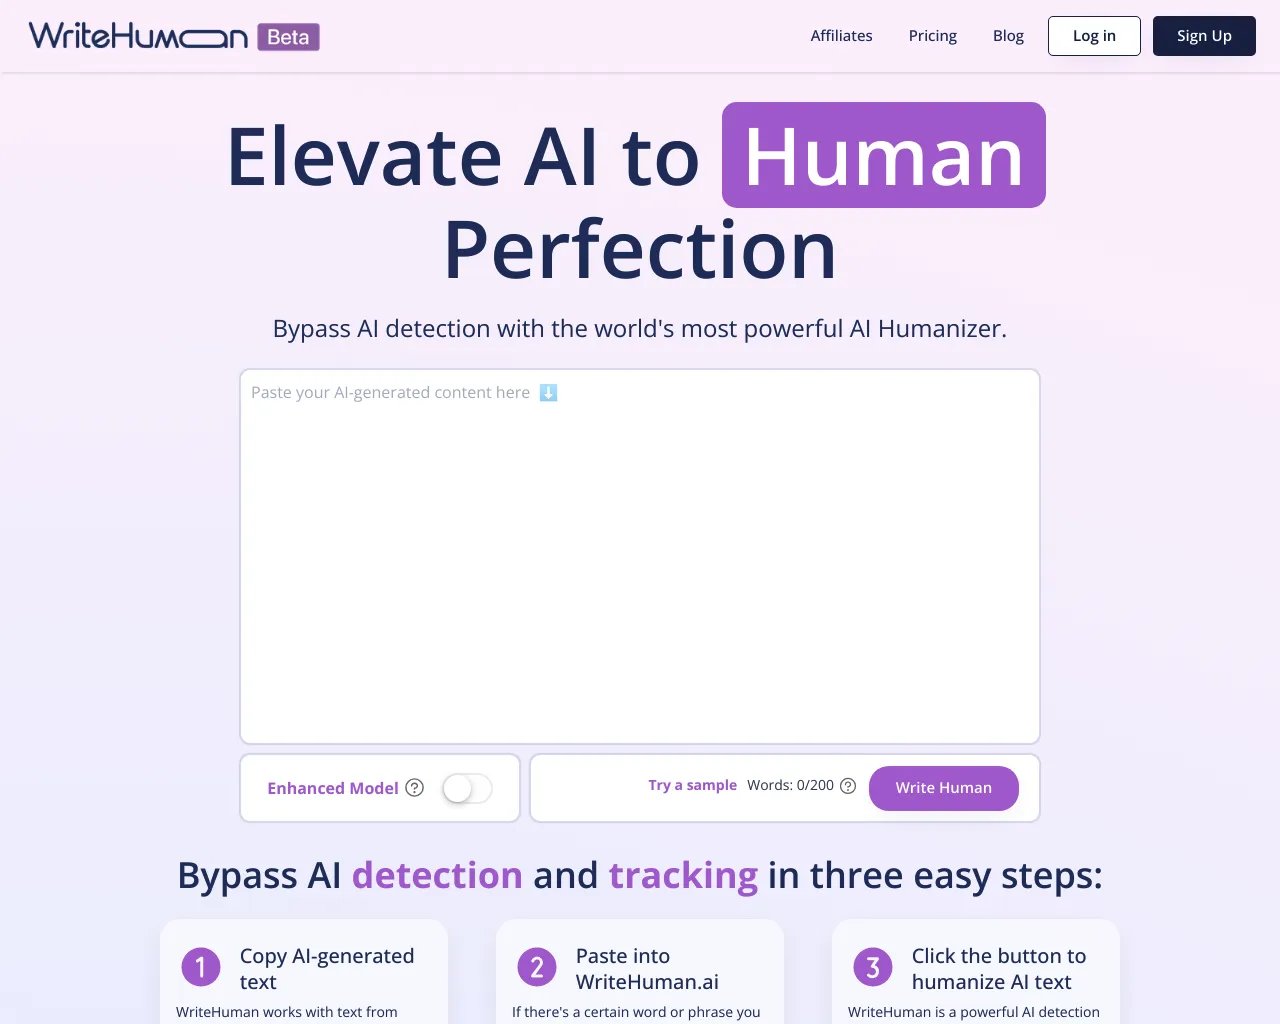 WriteHuman: Undetectable AI and AI Humanizer